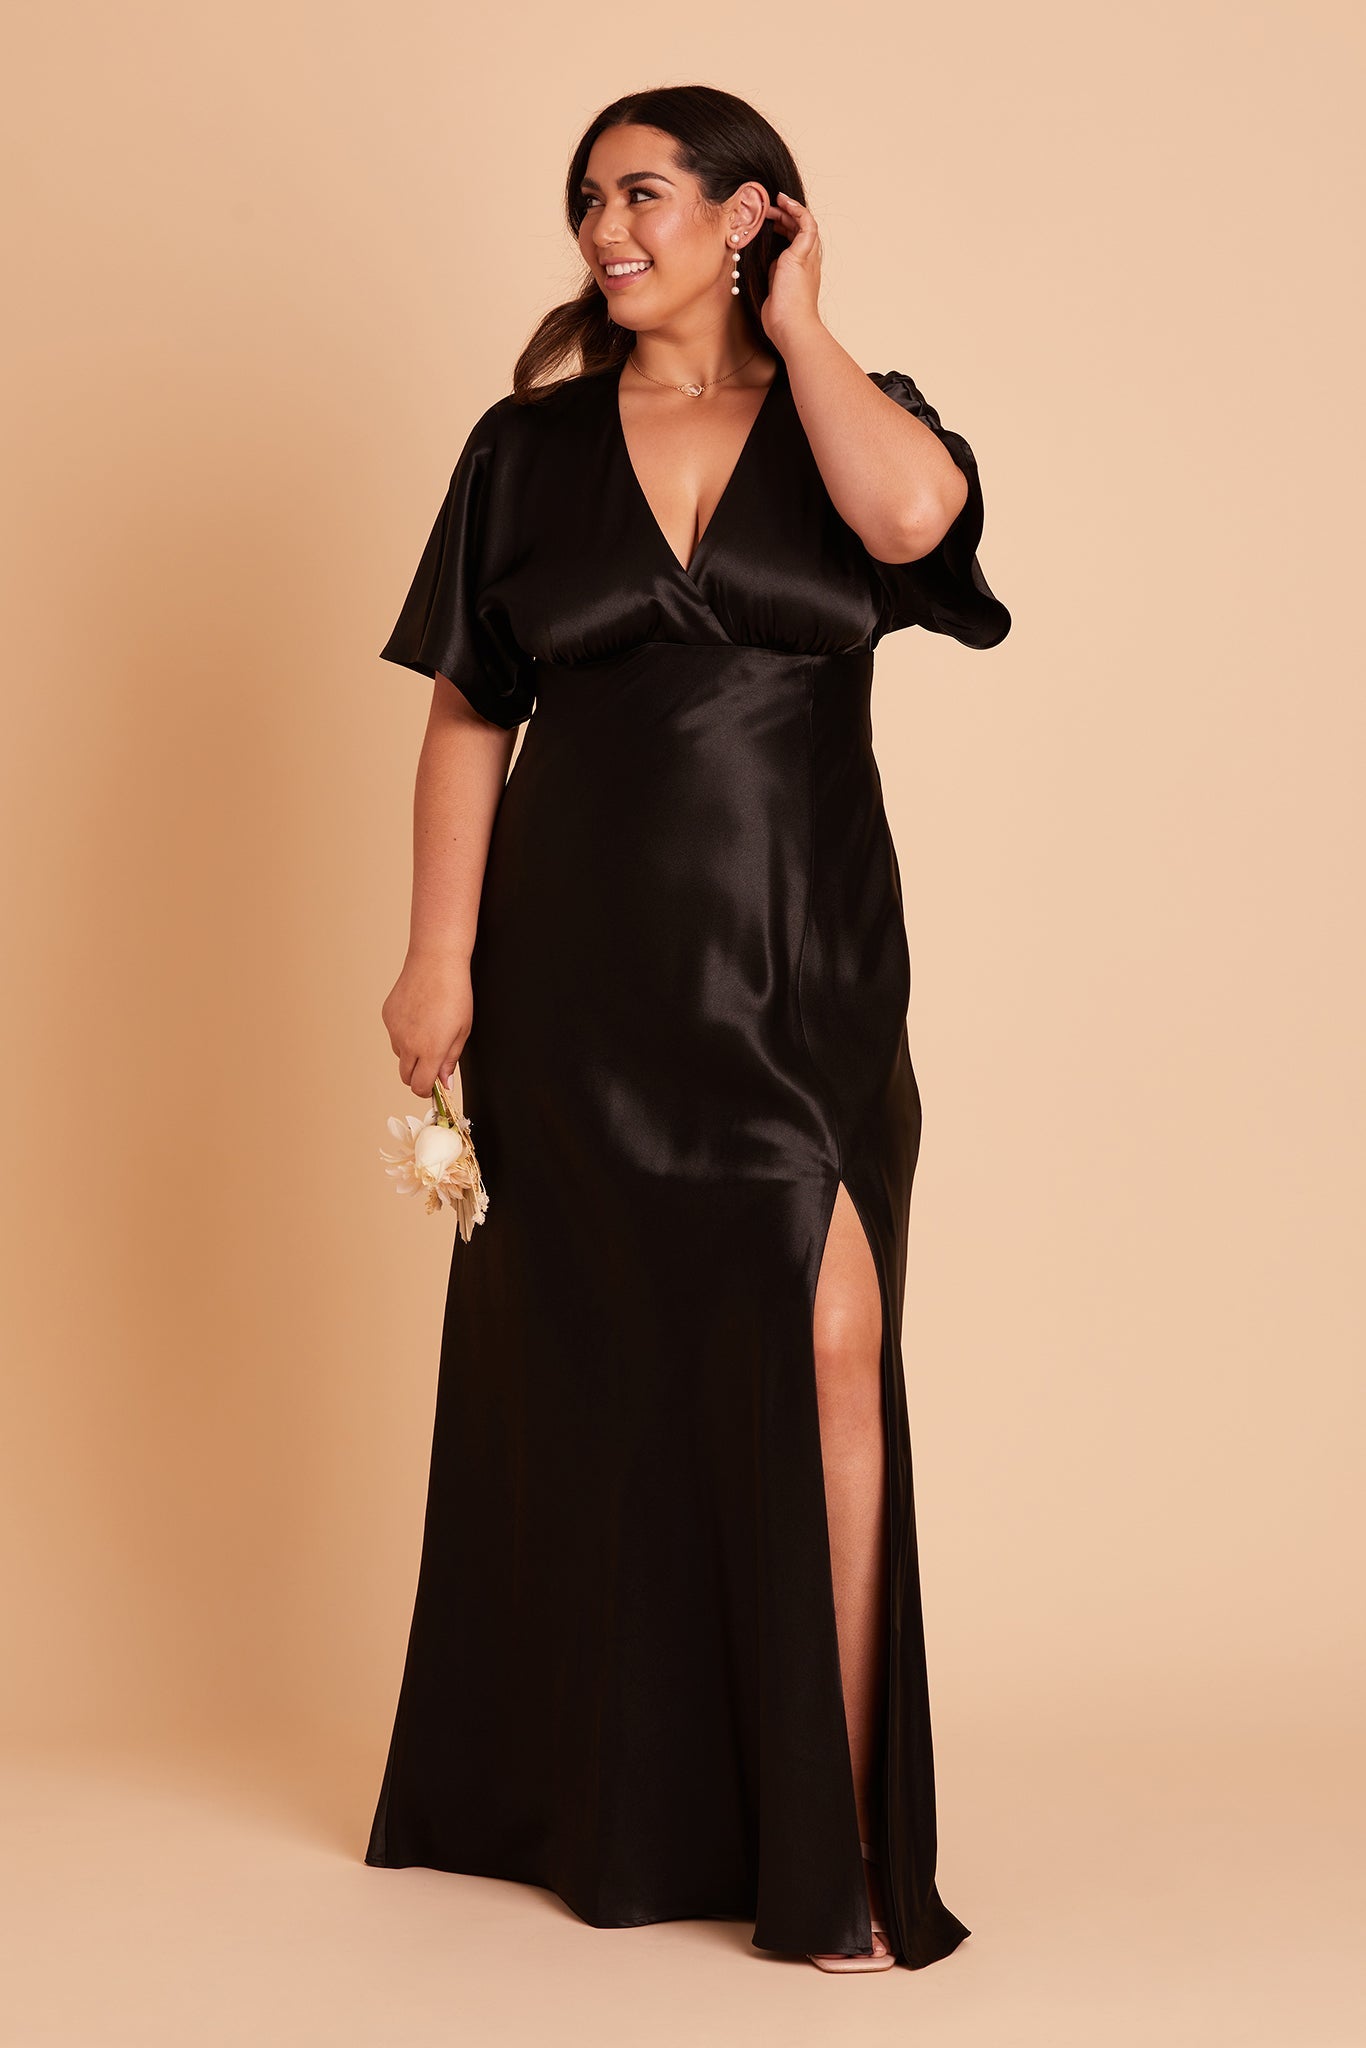 Jesse plus size bridesmaid dress with slit in black satin by Birdy Grey, front view